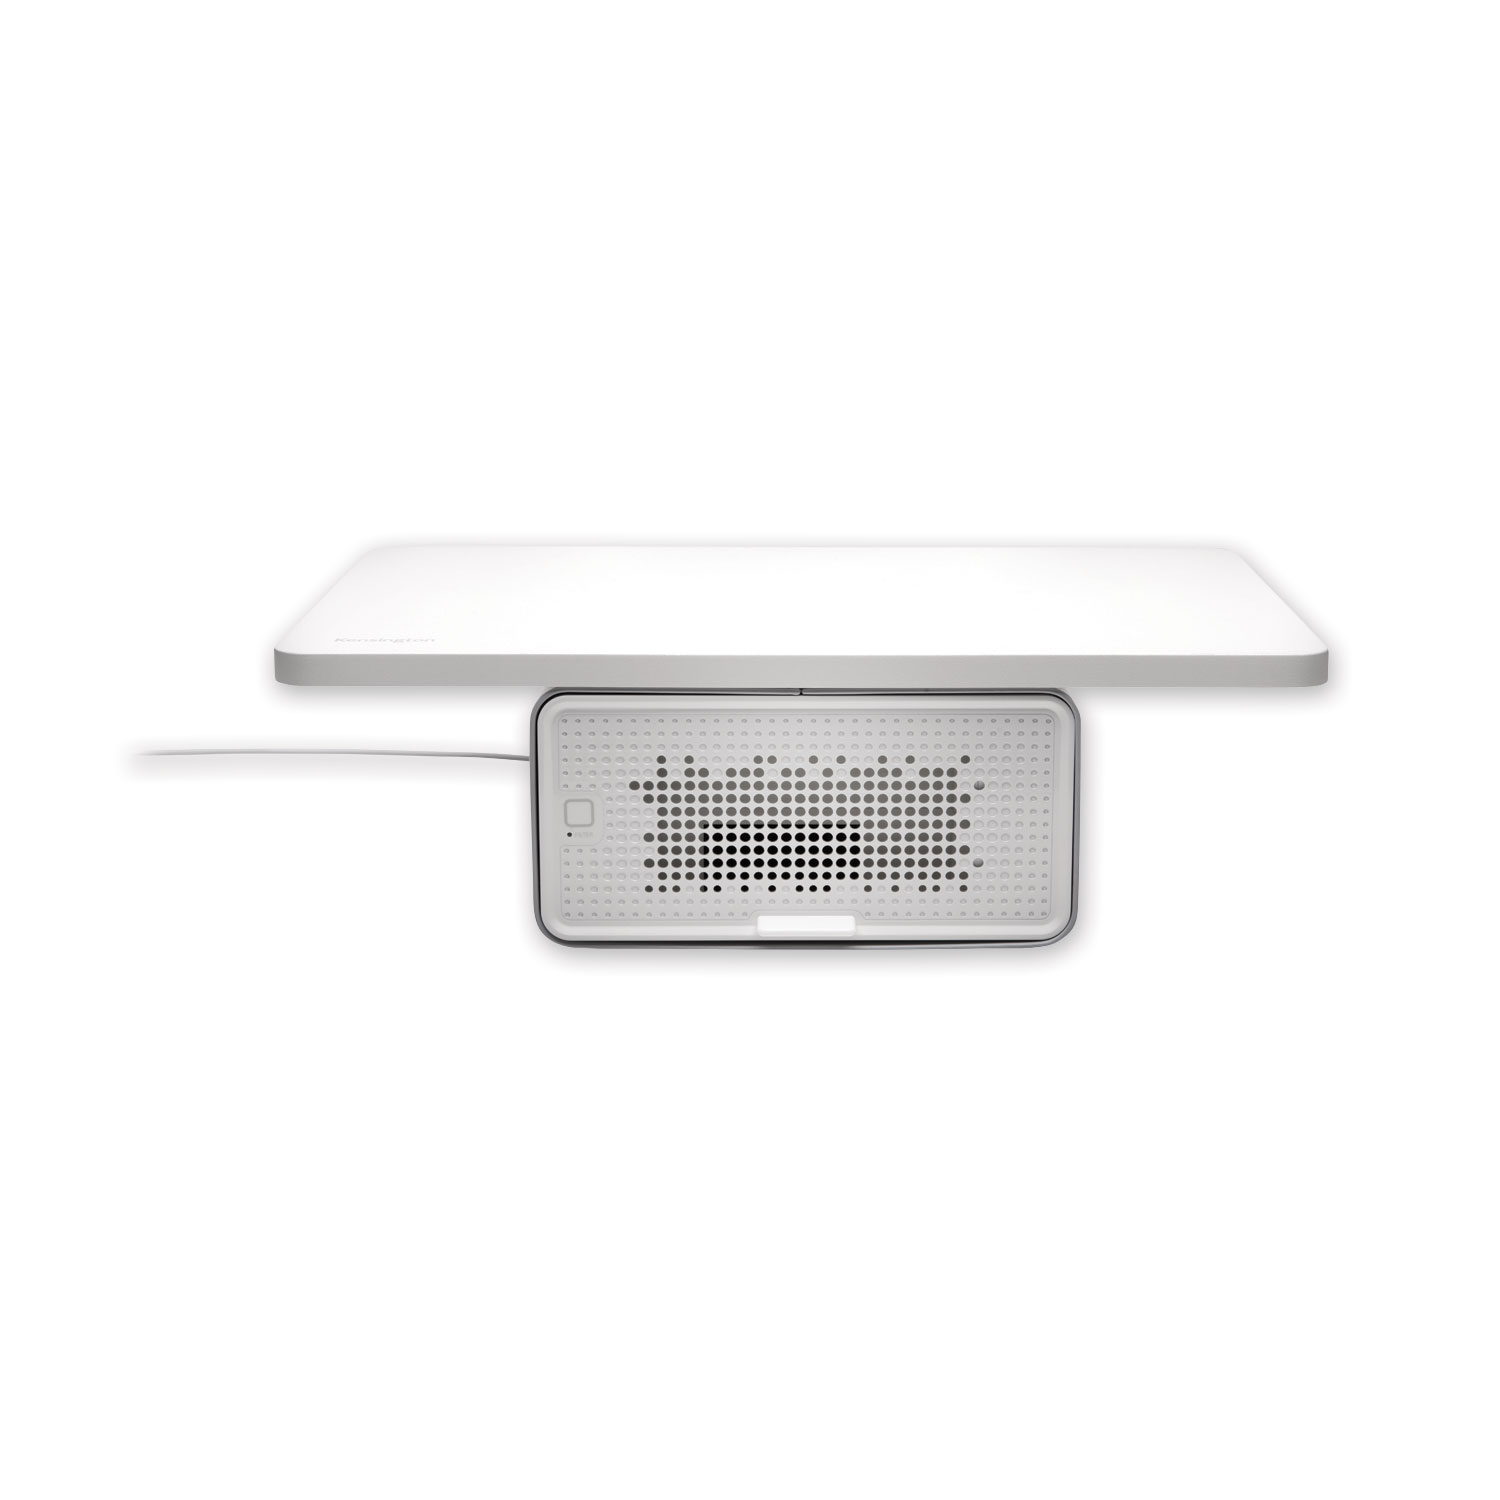 FreshView Wellness Monitor Stand with Air Purifier, 22.5 x 11.5 x 5.4, White